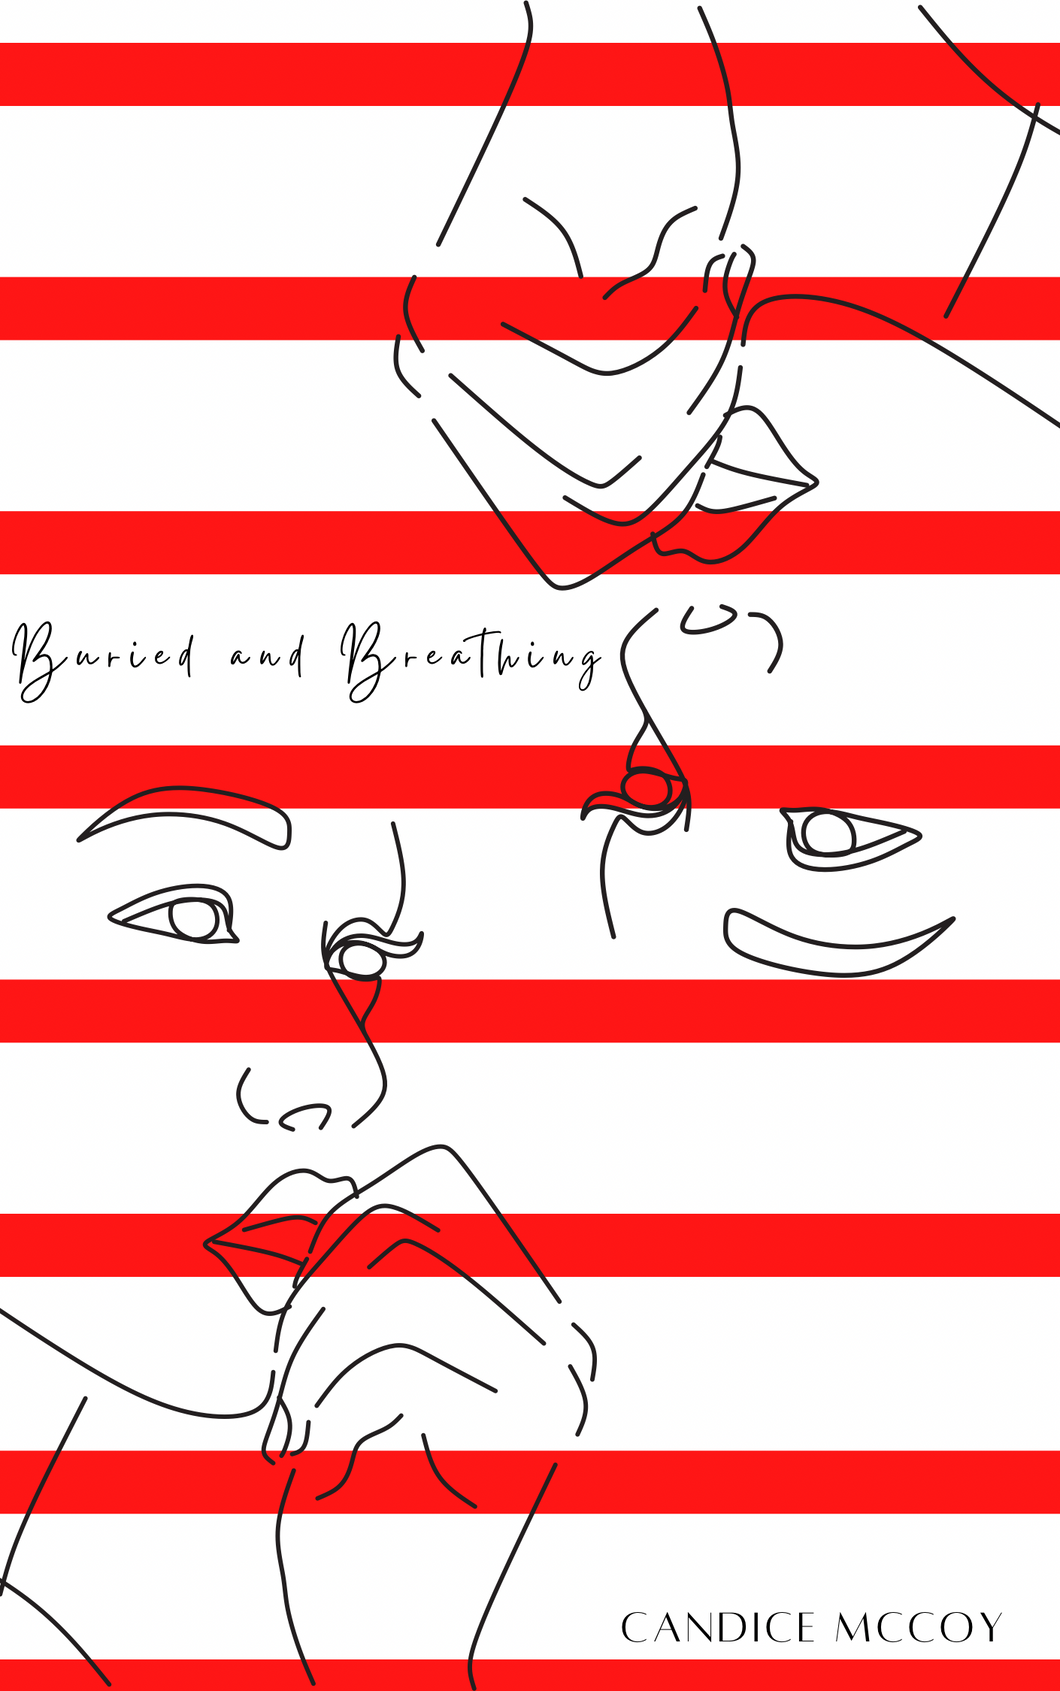 Buried and Breathing by Candice McCoy, A Poetry Collection: Connecting the Dots Between Love, Self, and Humanity